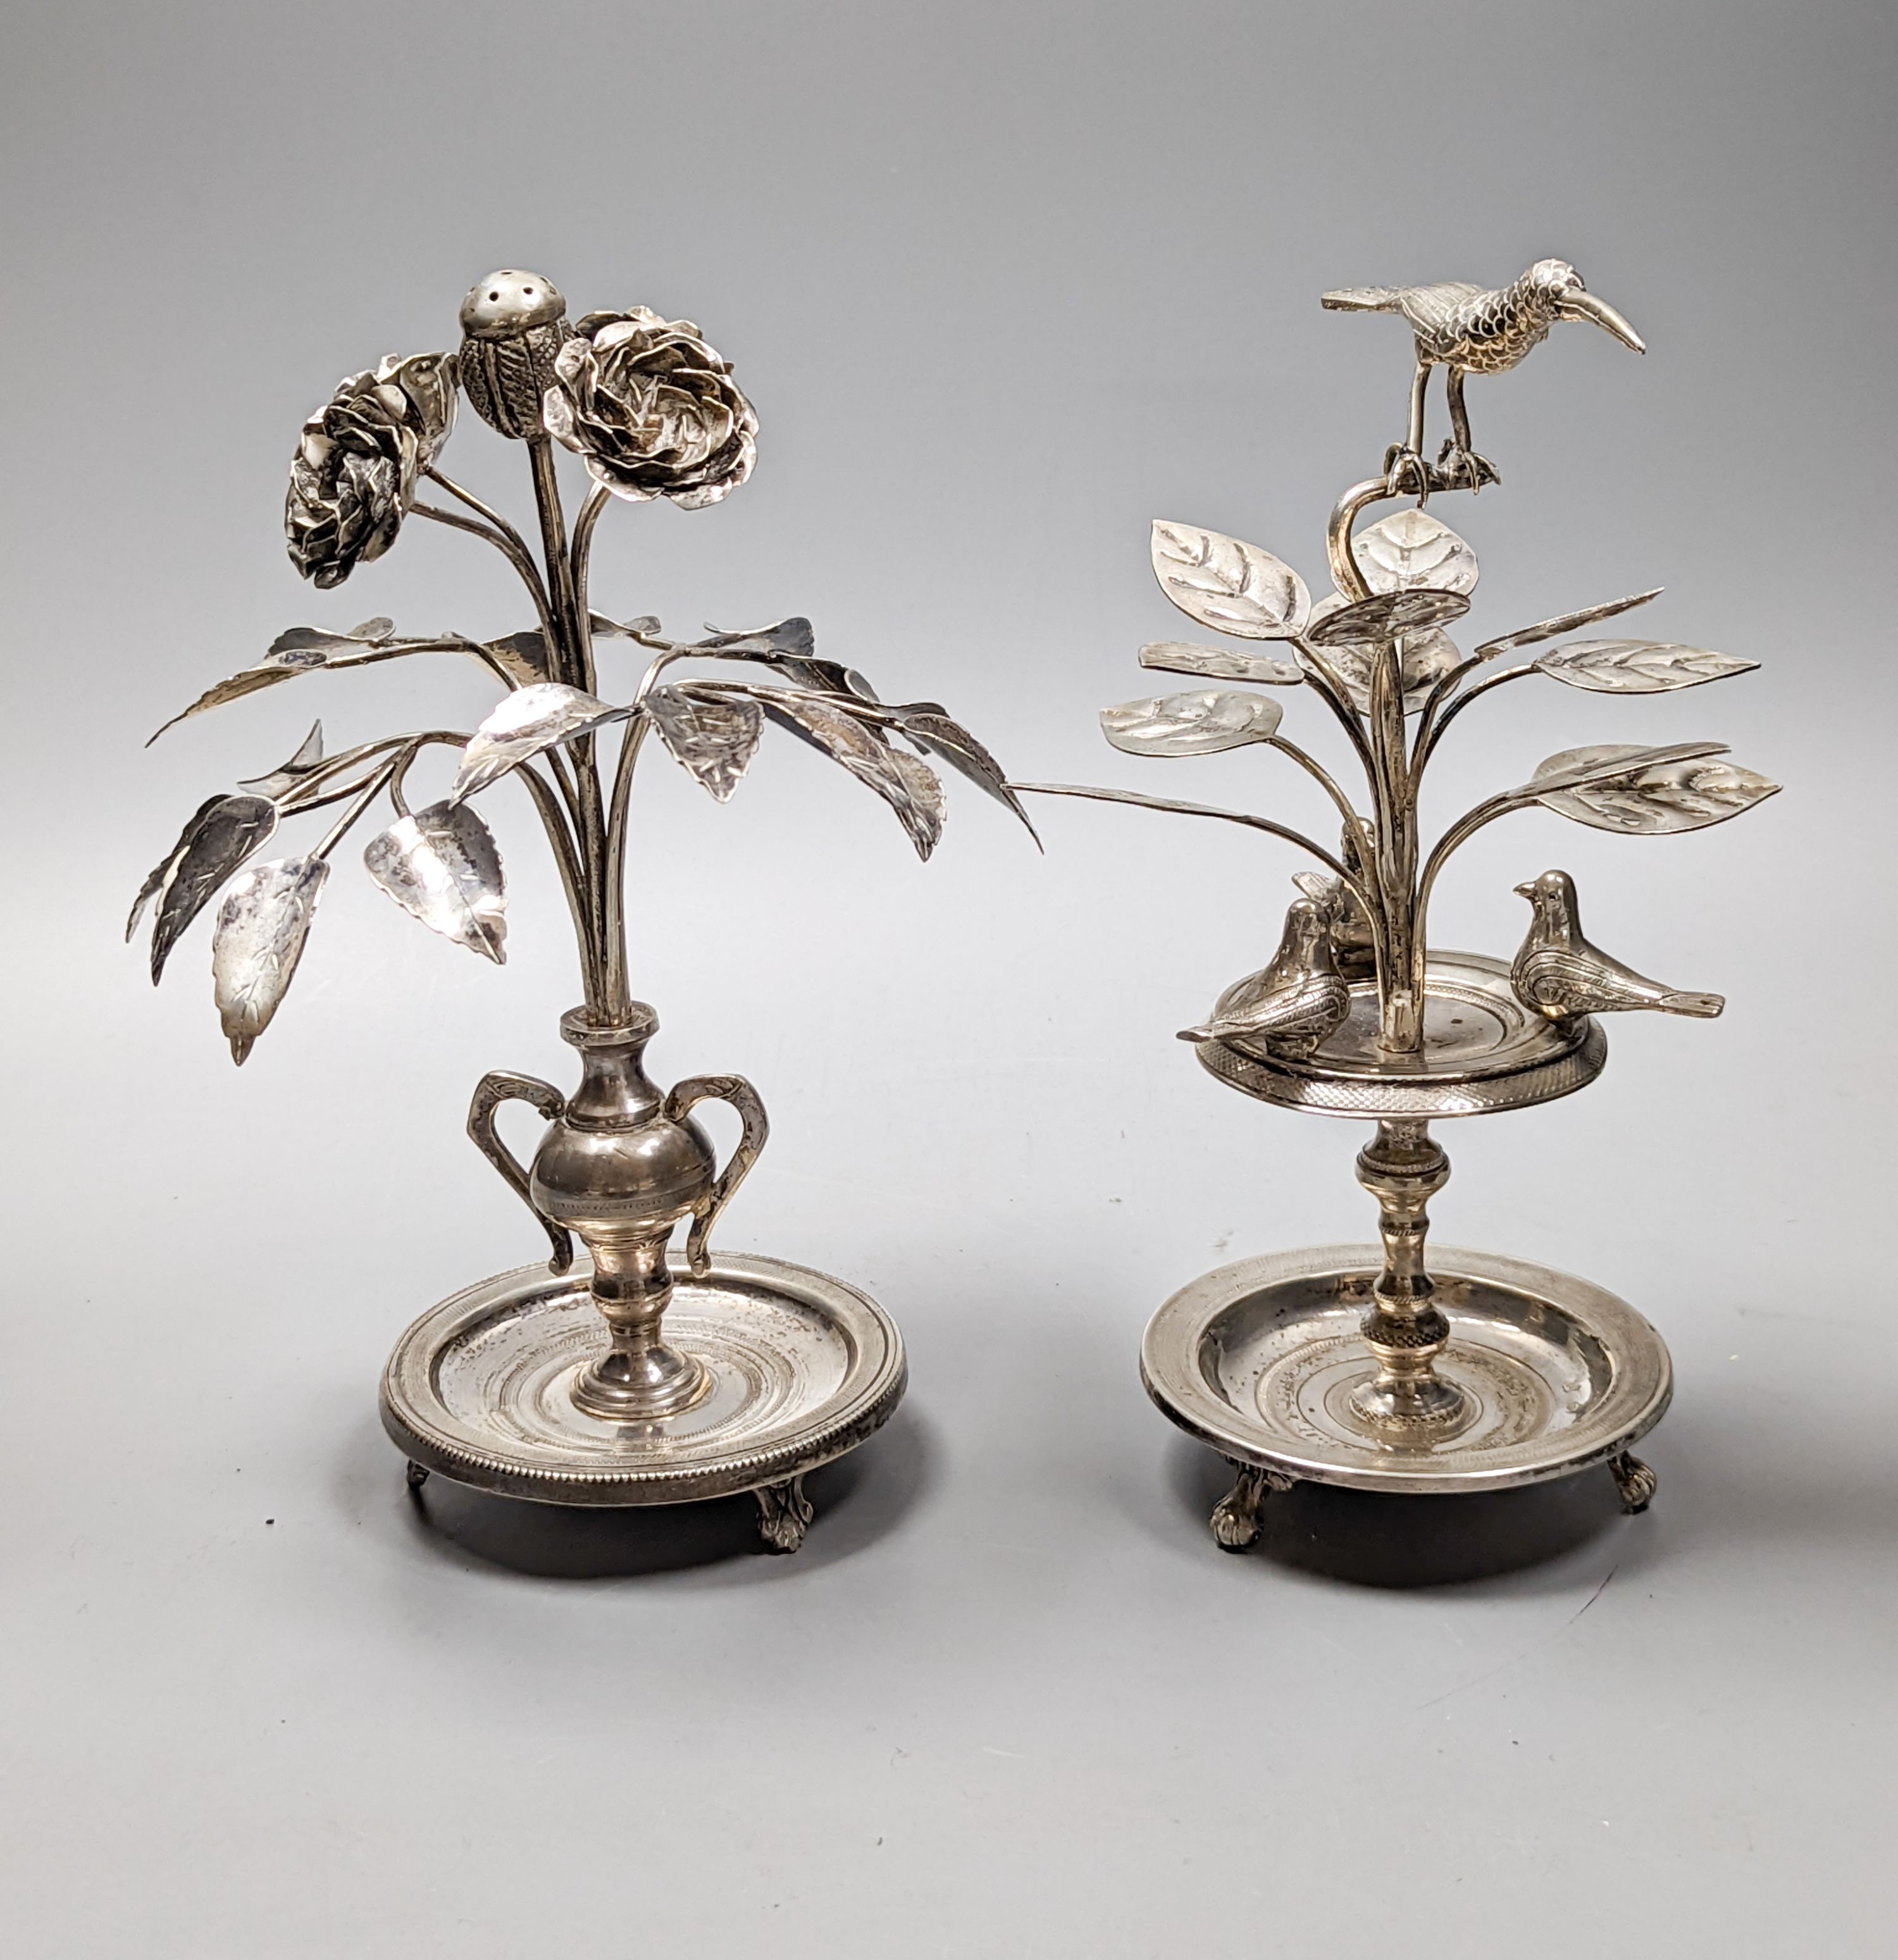 Tw South American? white metal toothpick holders?, modelled as a floral displays with circular bases, one with birds